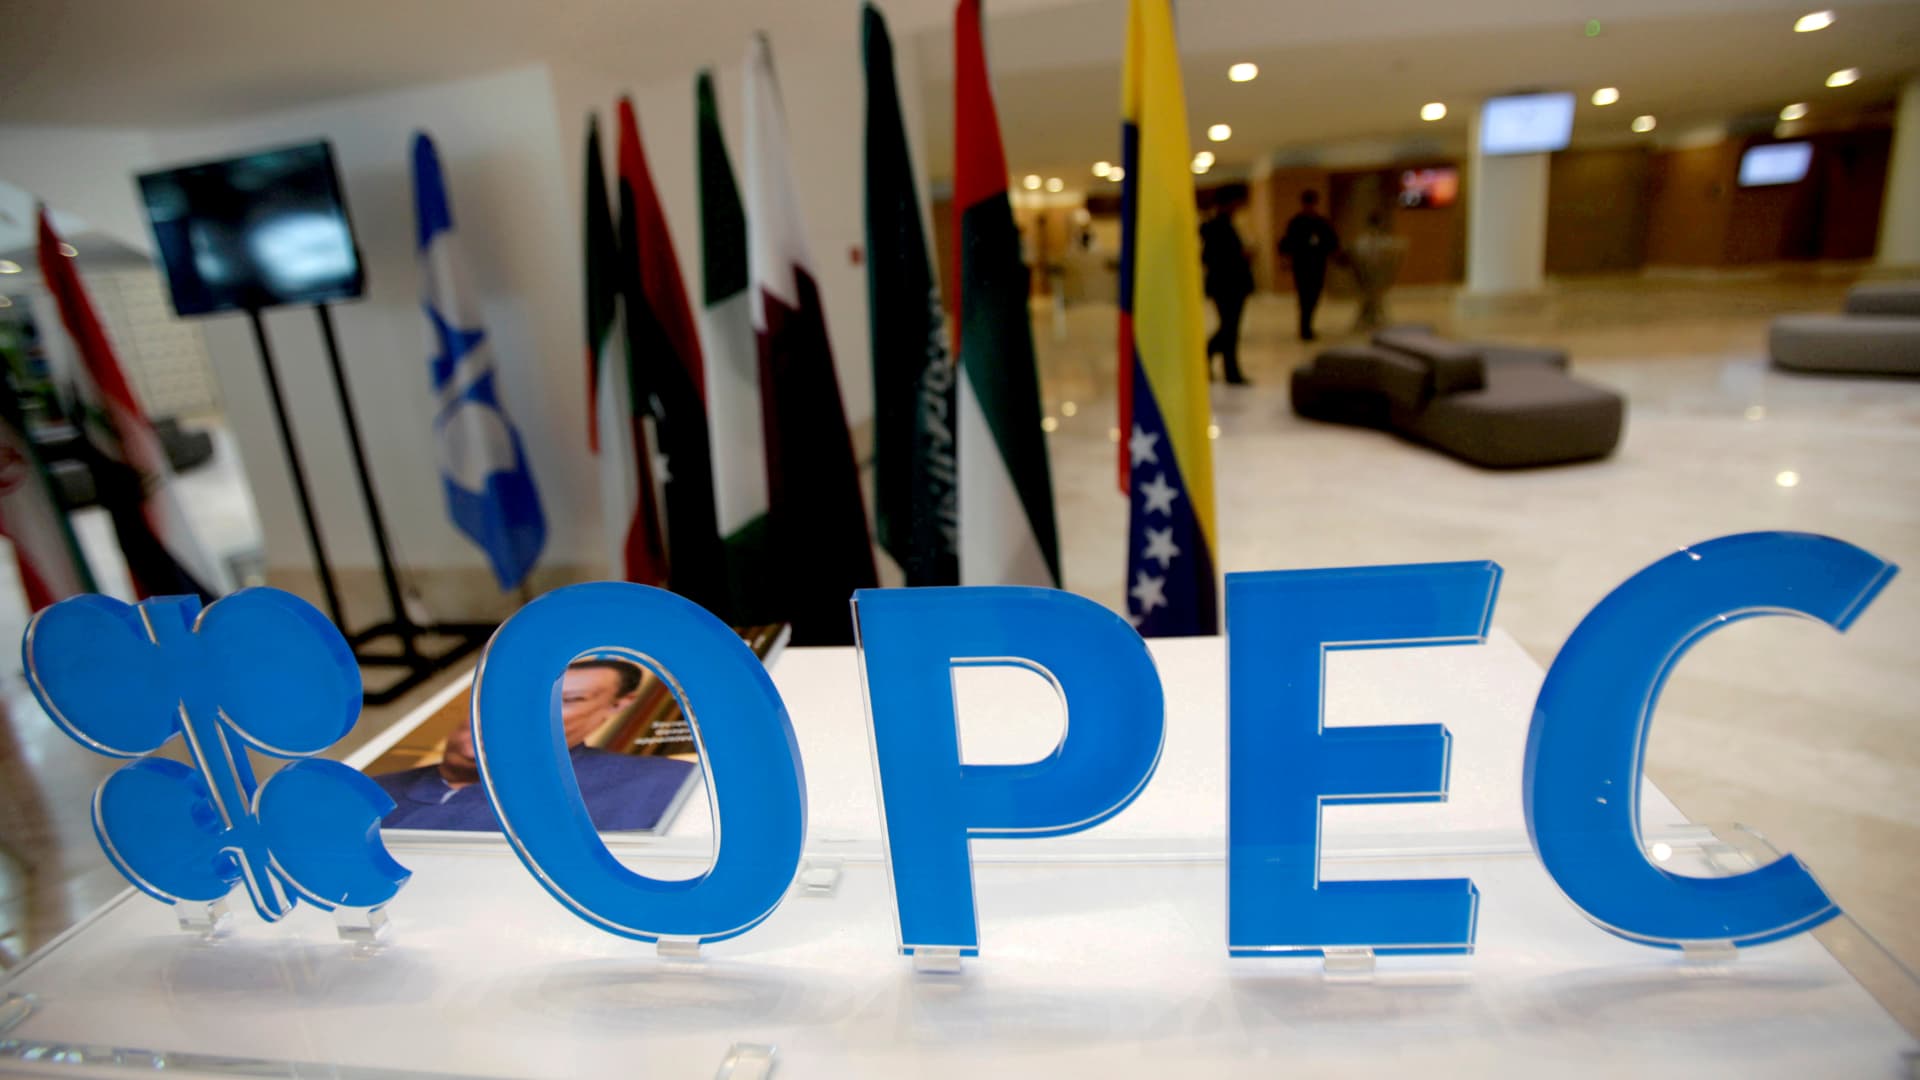 The OPEC logo pictured ahead of an informal meeting between members of the Organization of the Petroleum Exporting Countries (OPEC) in Algiers, Algeria.